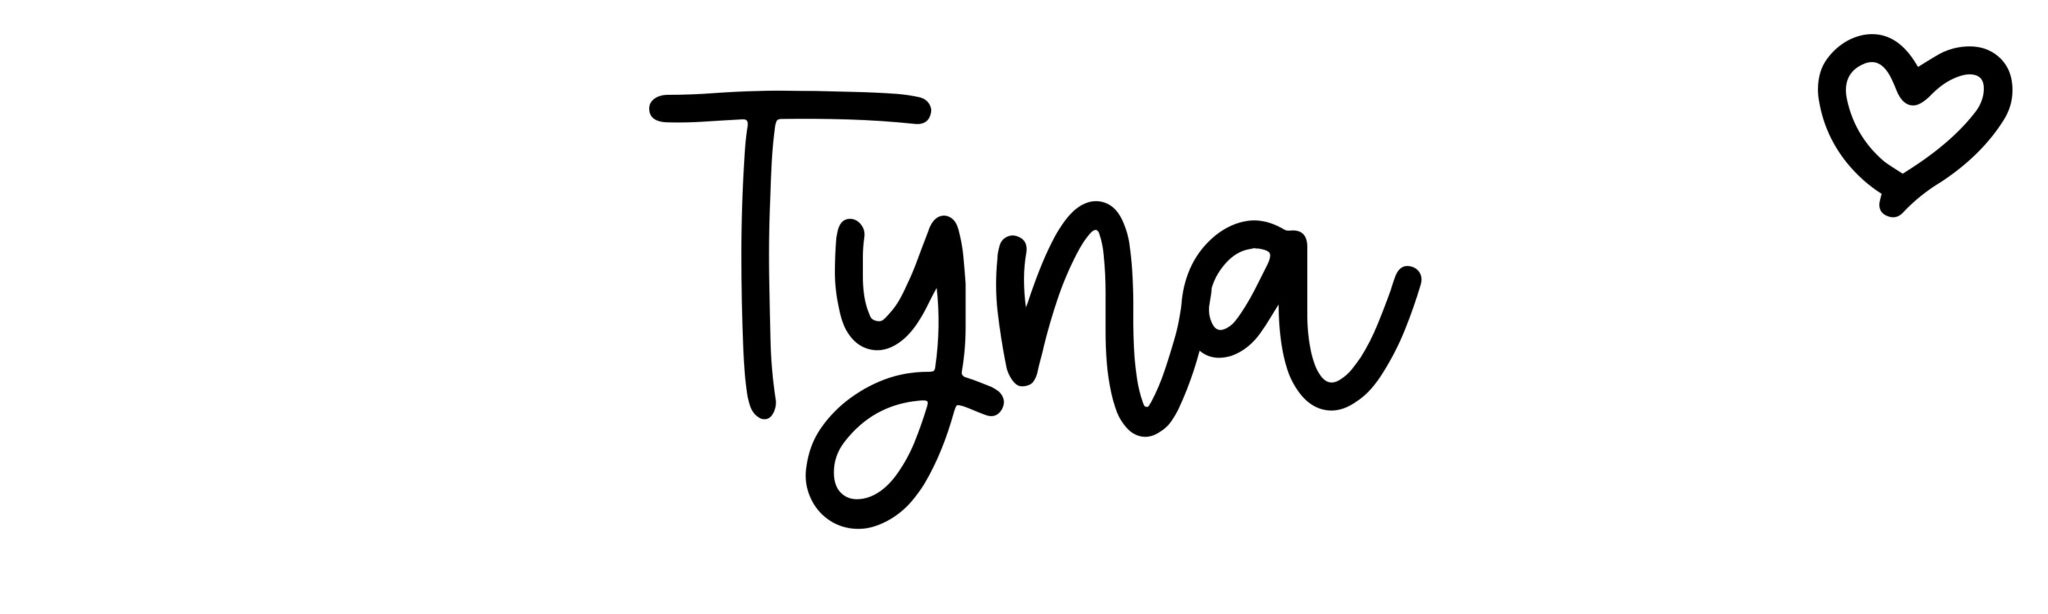 Tyna - Name meaning, origin, variations and more